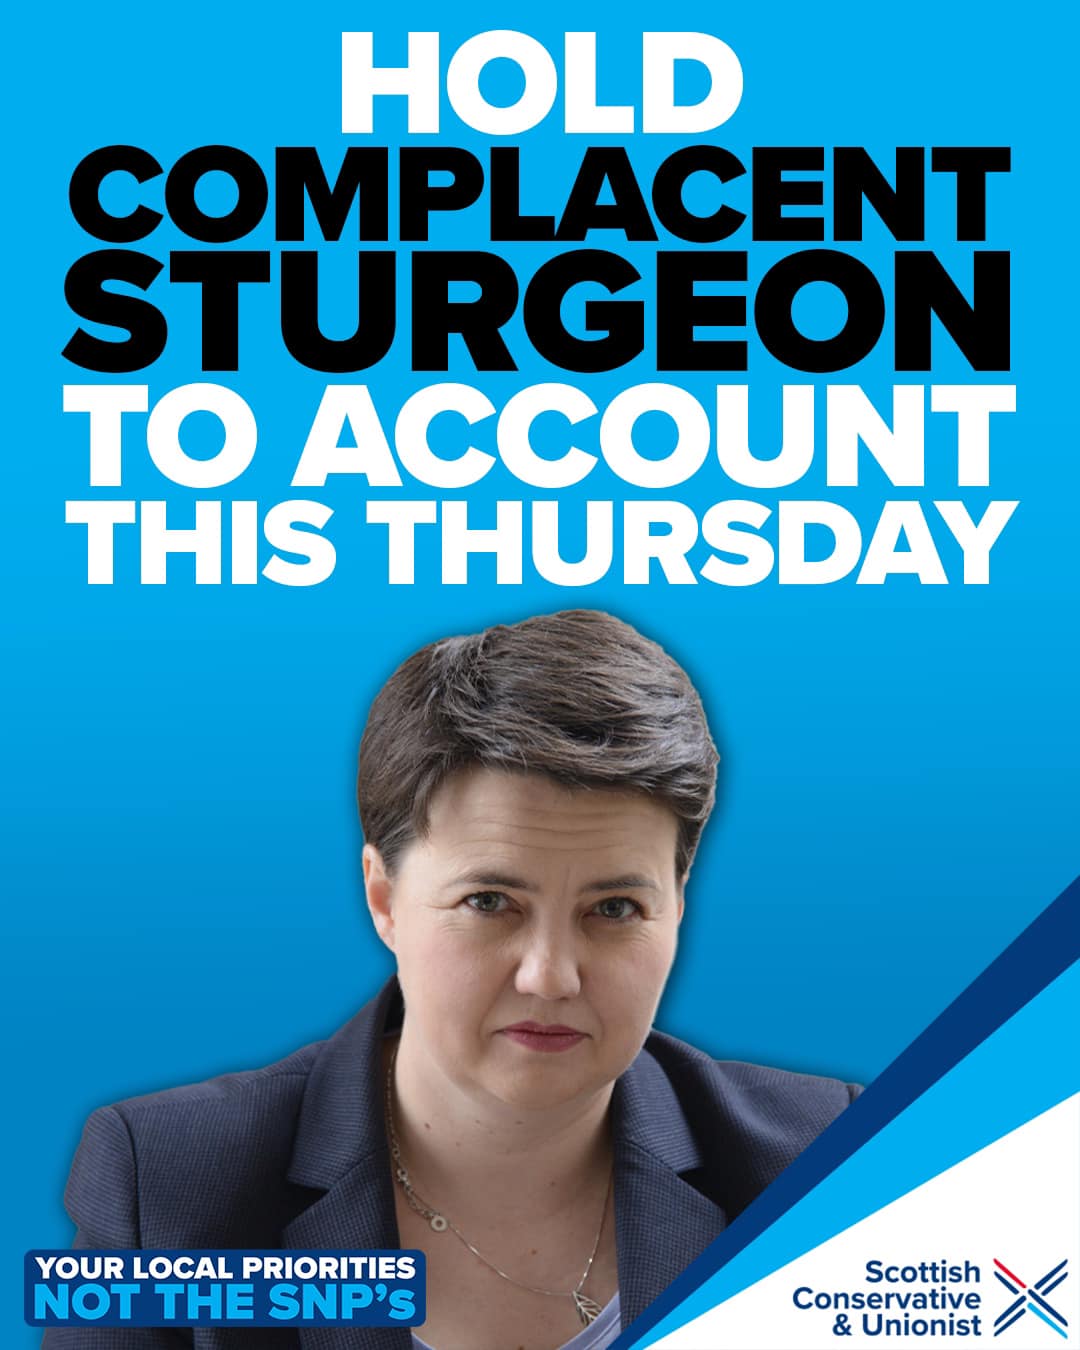 278943027 549057479924395 934038801983735318 n Ruth Davidson: Use this election to judge complacent Sturgeon